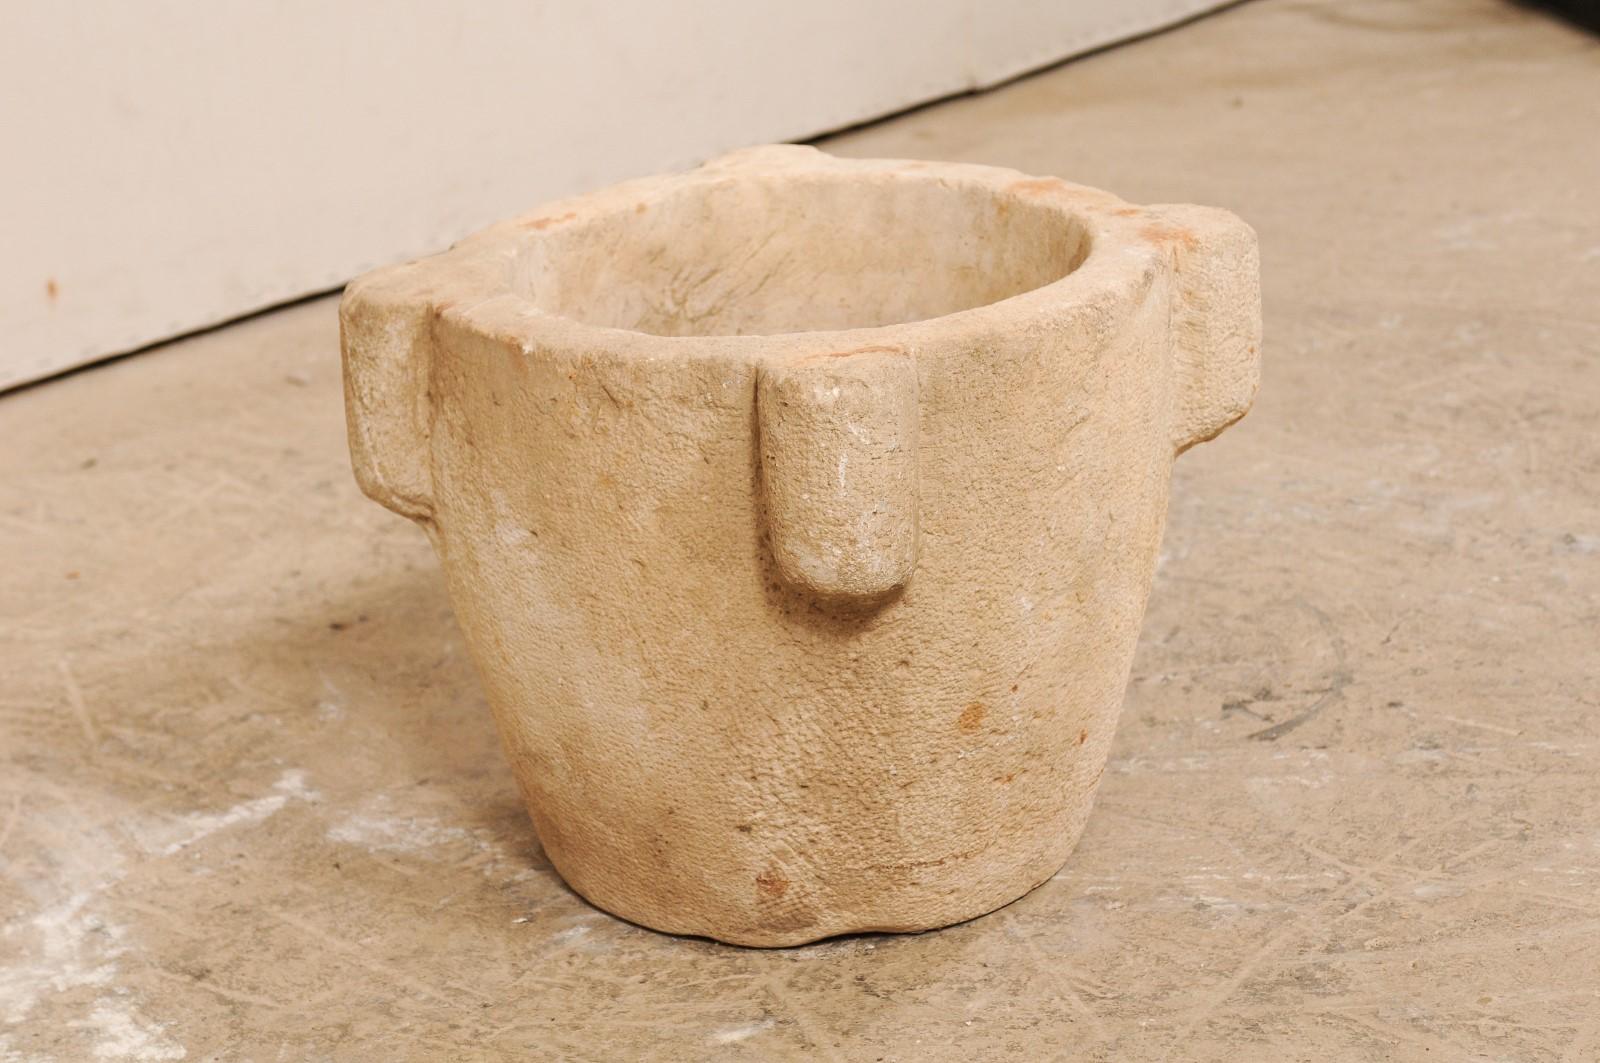 A Spanish hand carved stone mortar from the 18th century. This antique mortar from Spain, once used to grind various ingredients for cooking or medicinal purposes, is nicely sized standing at 14